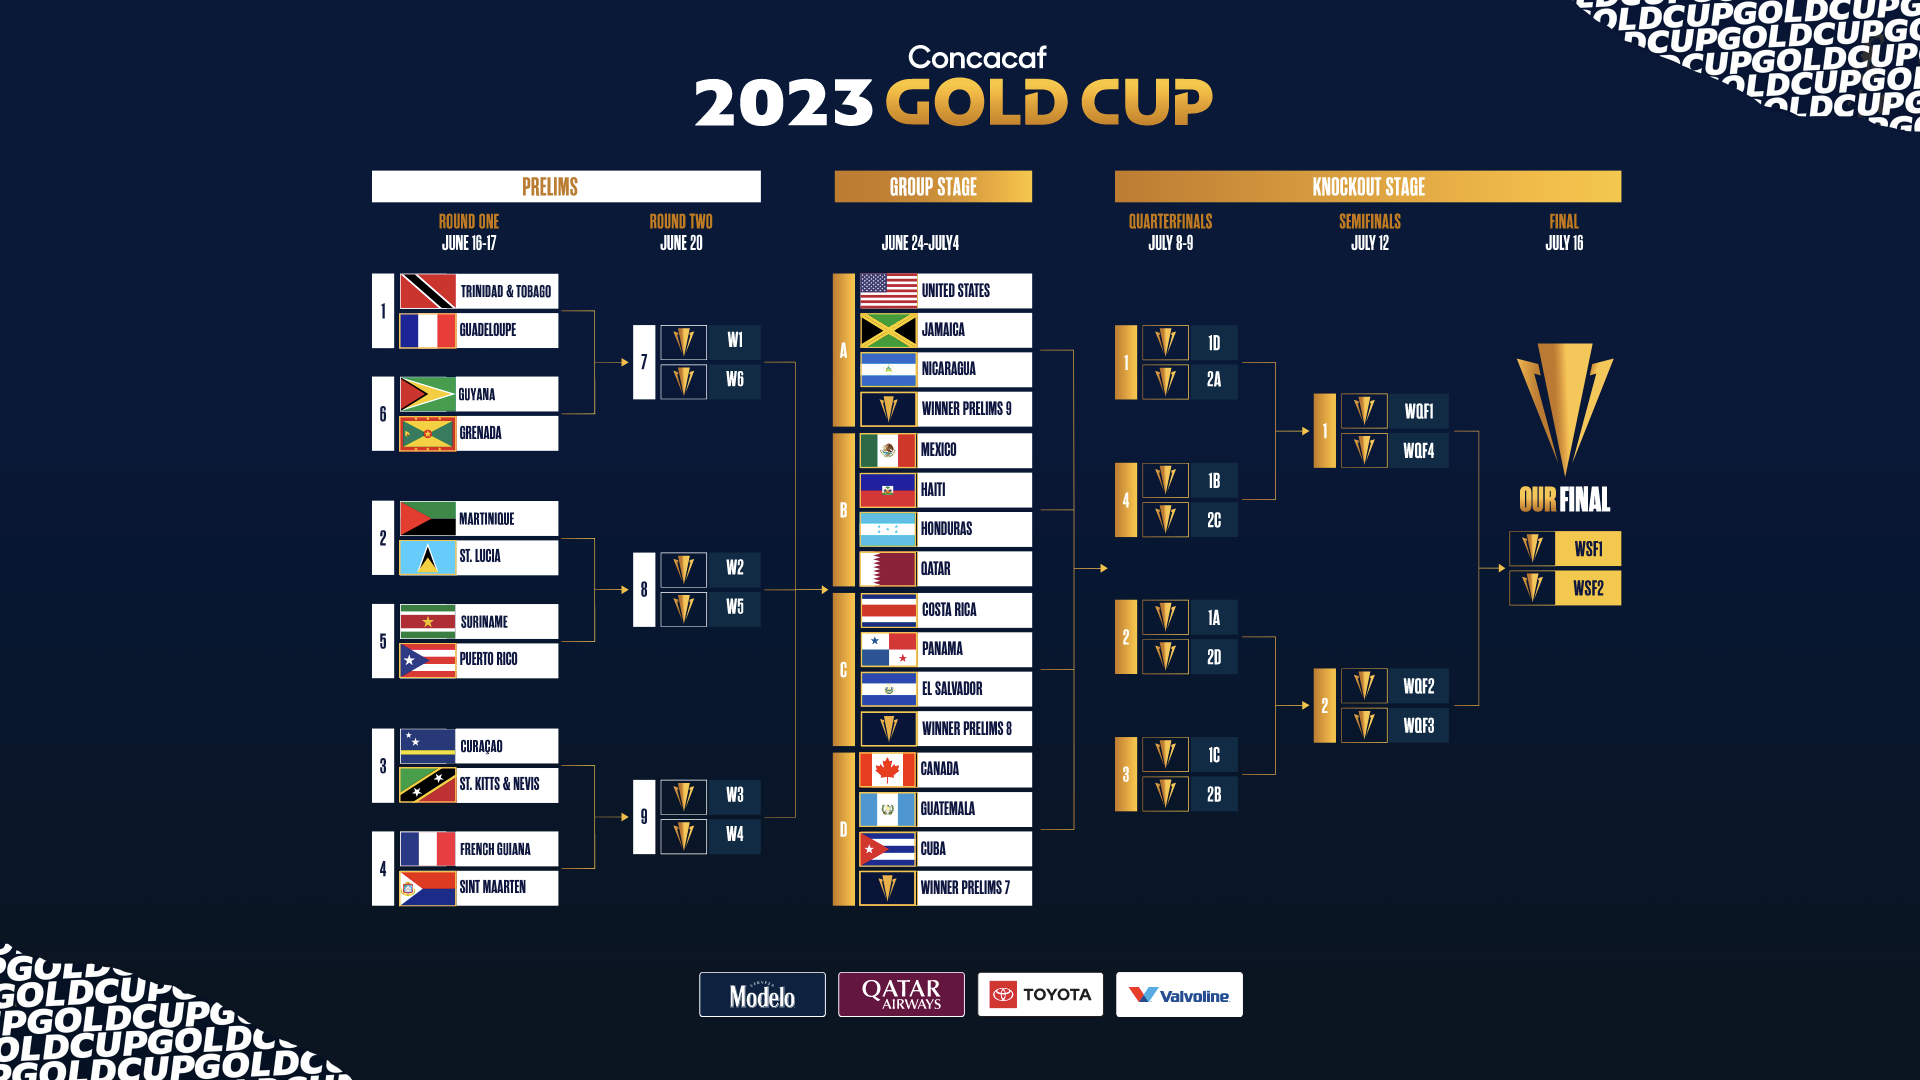 The United States now their path through the qualifying stages if they are to defend their Gold Cup title before home fans later this year ©CONCACAF